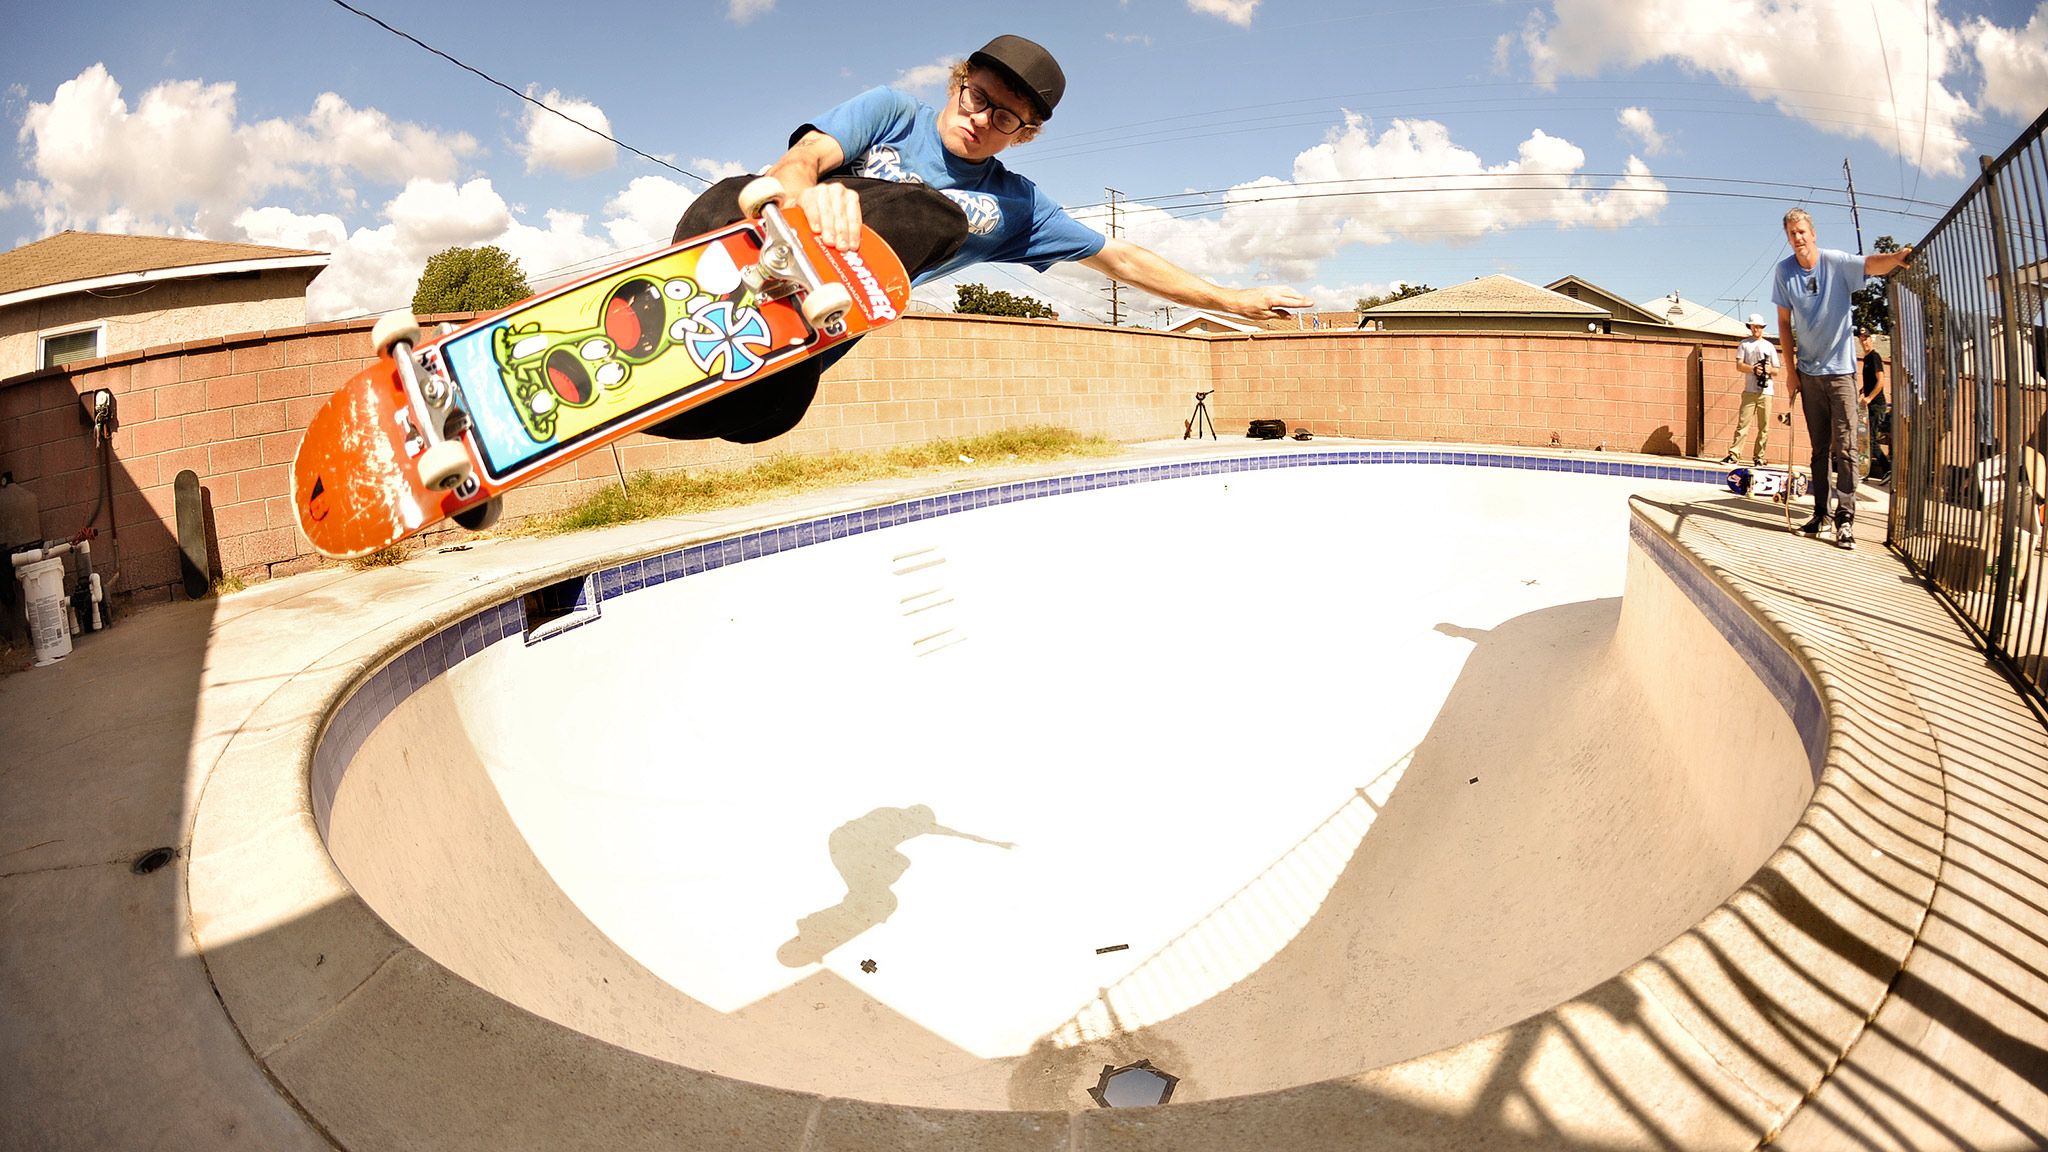 Skateboard photographer Rhino shoots the best action in 2013 - X Games